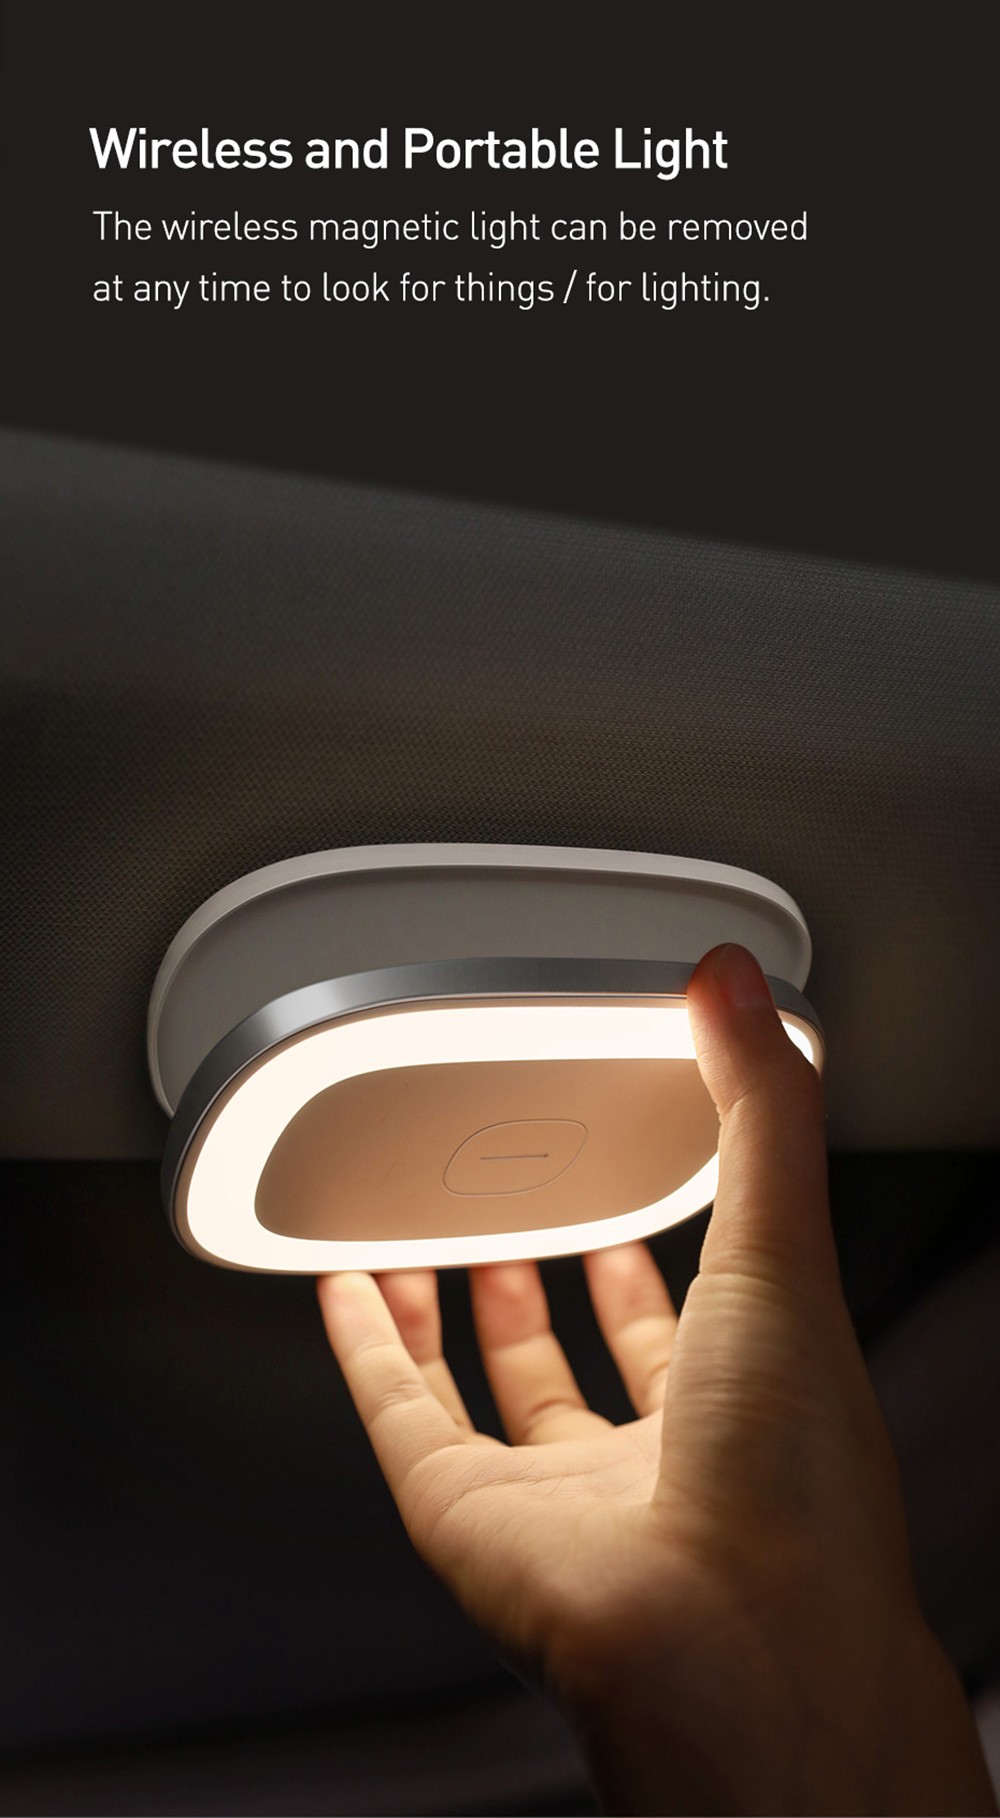 Baseus LED Night Light Car Touch Roof Light Ceiling Magnet Lamp Automobile Interior Light USB Rechargeable - White